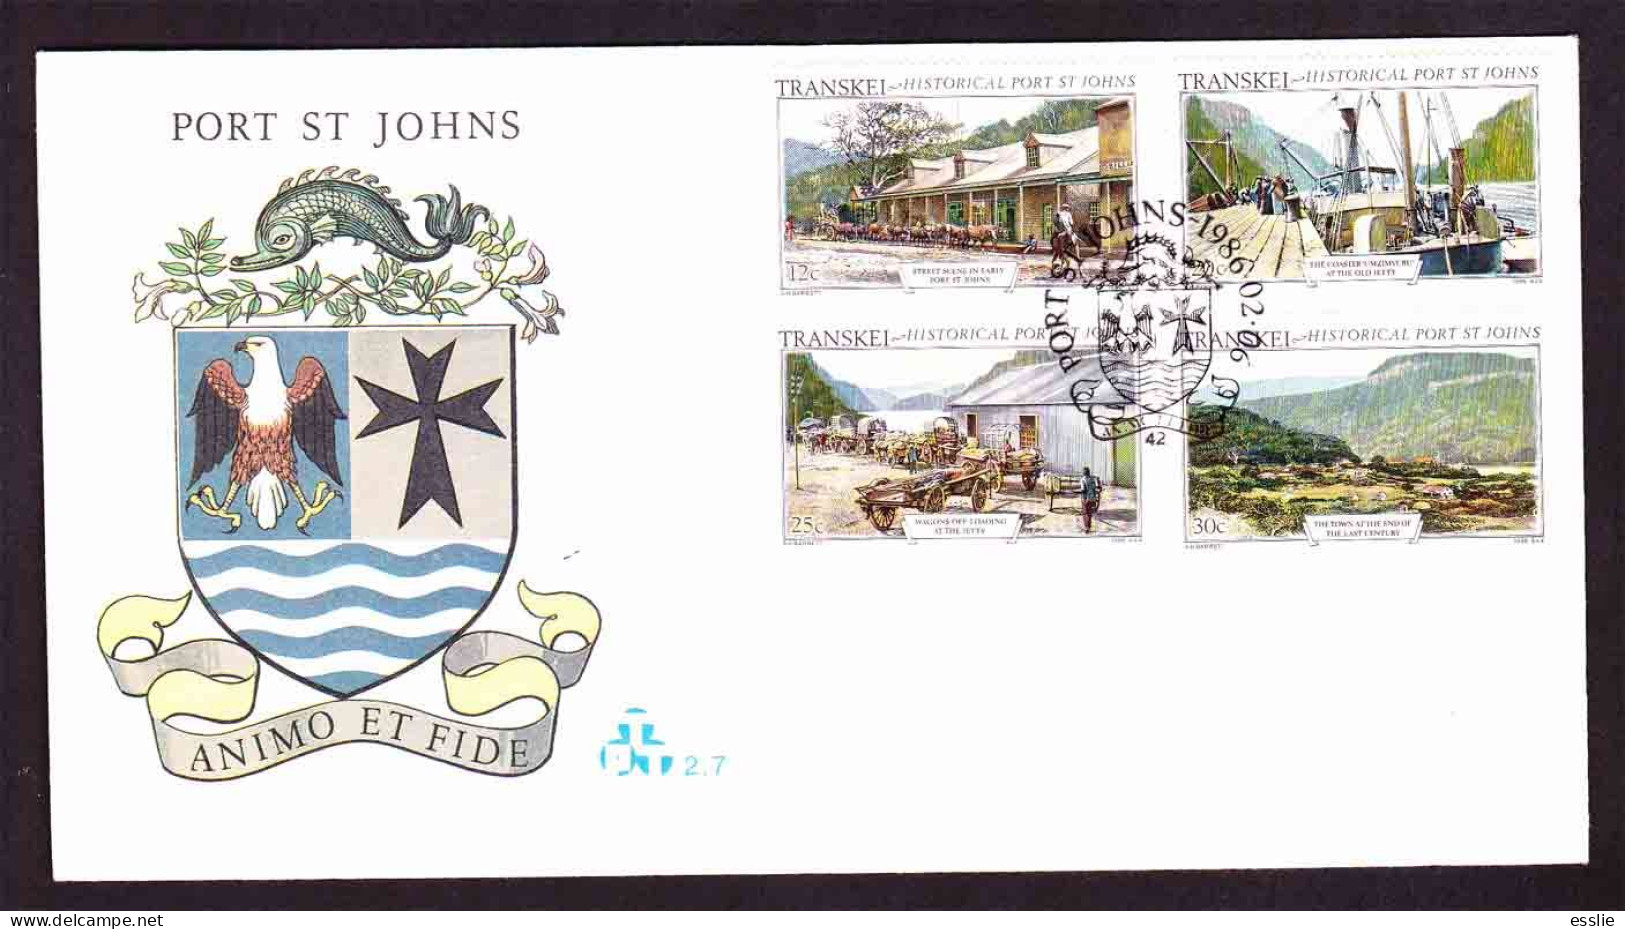 Transkei - 1986 - Historical Port St Johns - First Day Cover - Small - Transkei